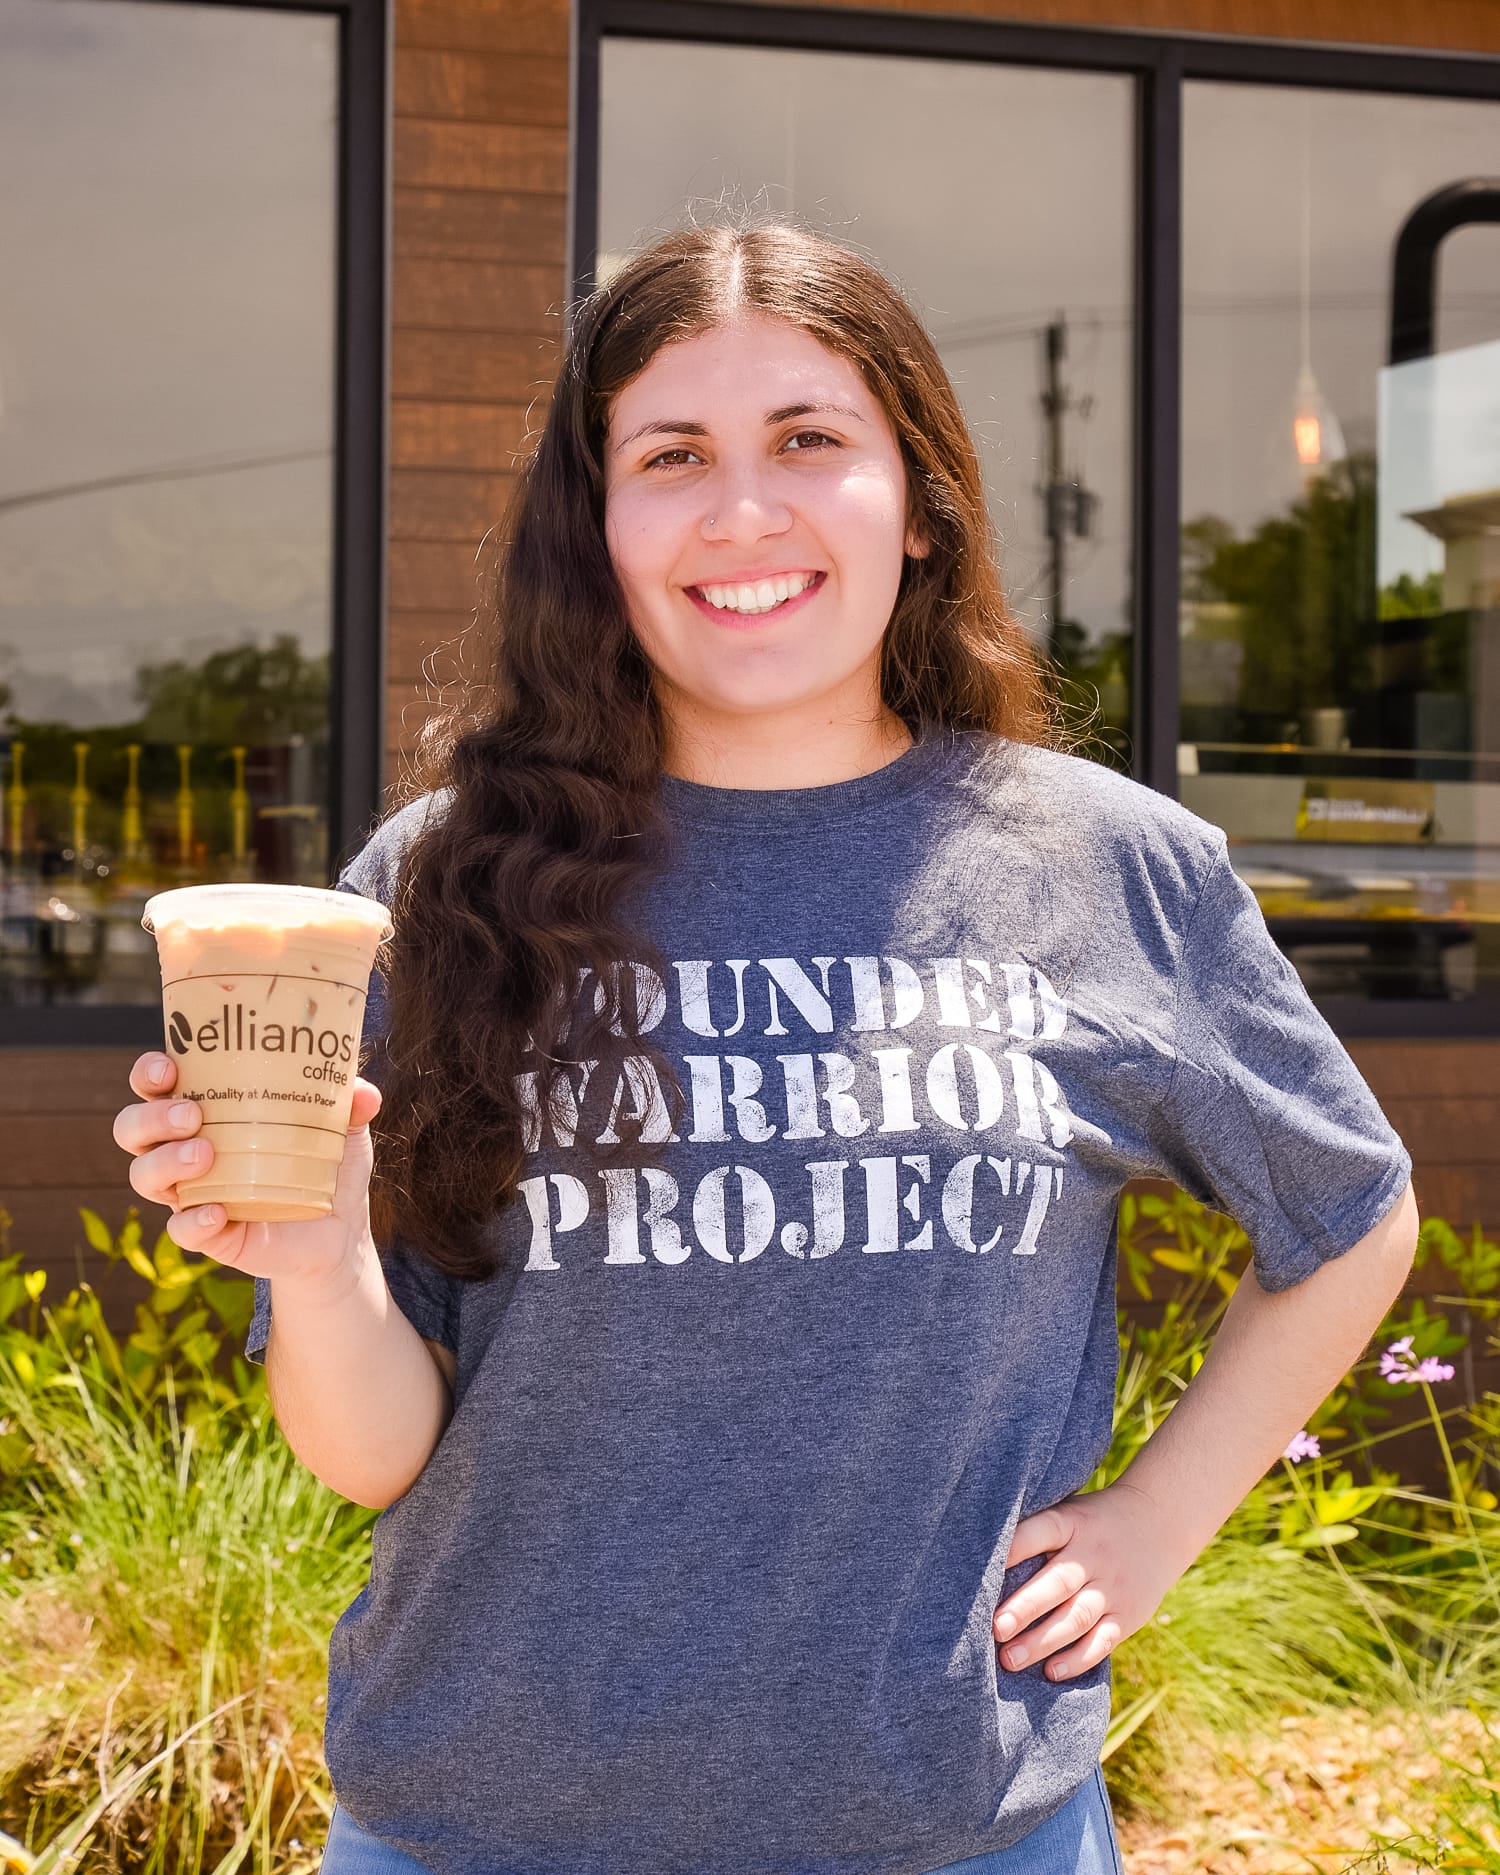 Ellianos Coffee Partners with Wounded Warrior Project to Support Veterans in May